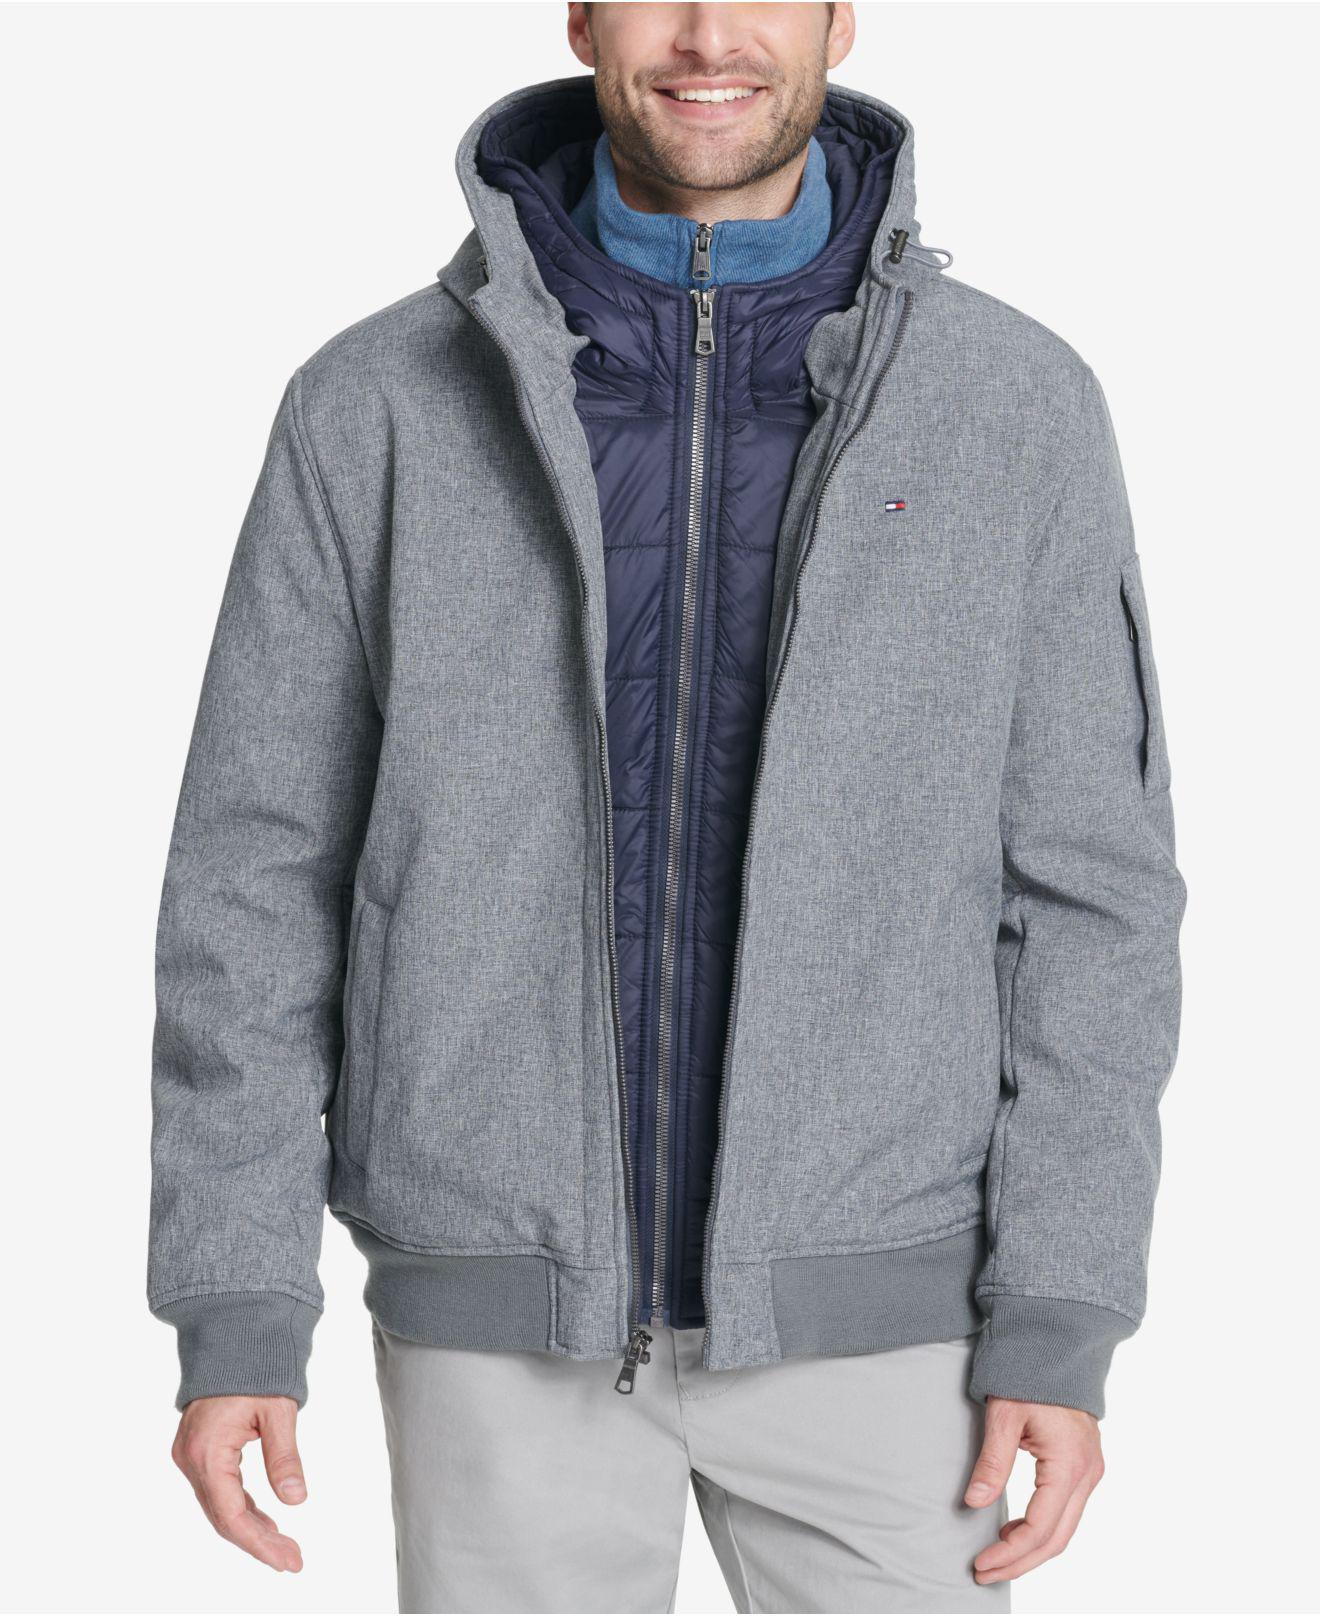 Two Tone Hooded Bomber Tommy Hilfiger Wholesale Offers, 65% OFF |  lamphitrite-palace.com